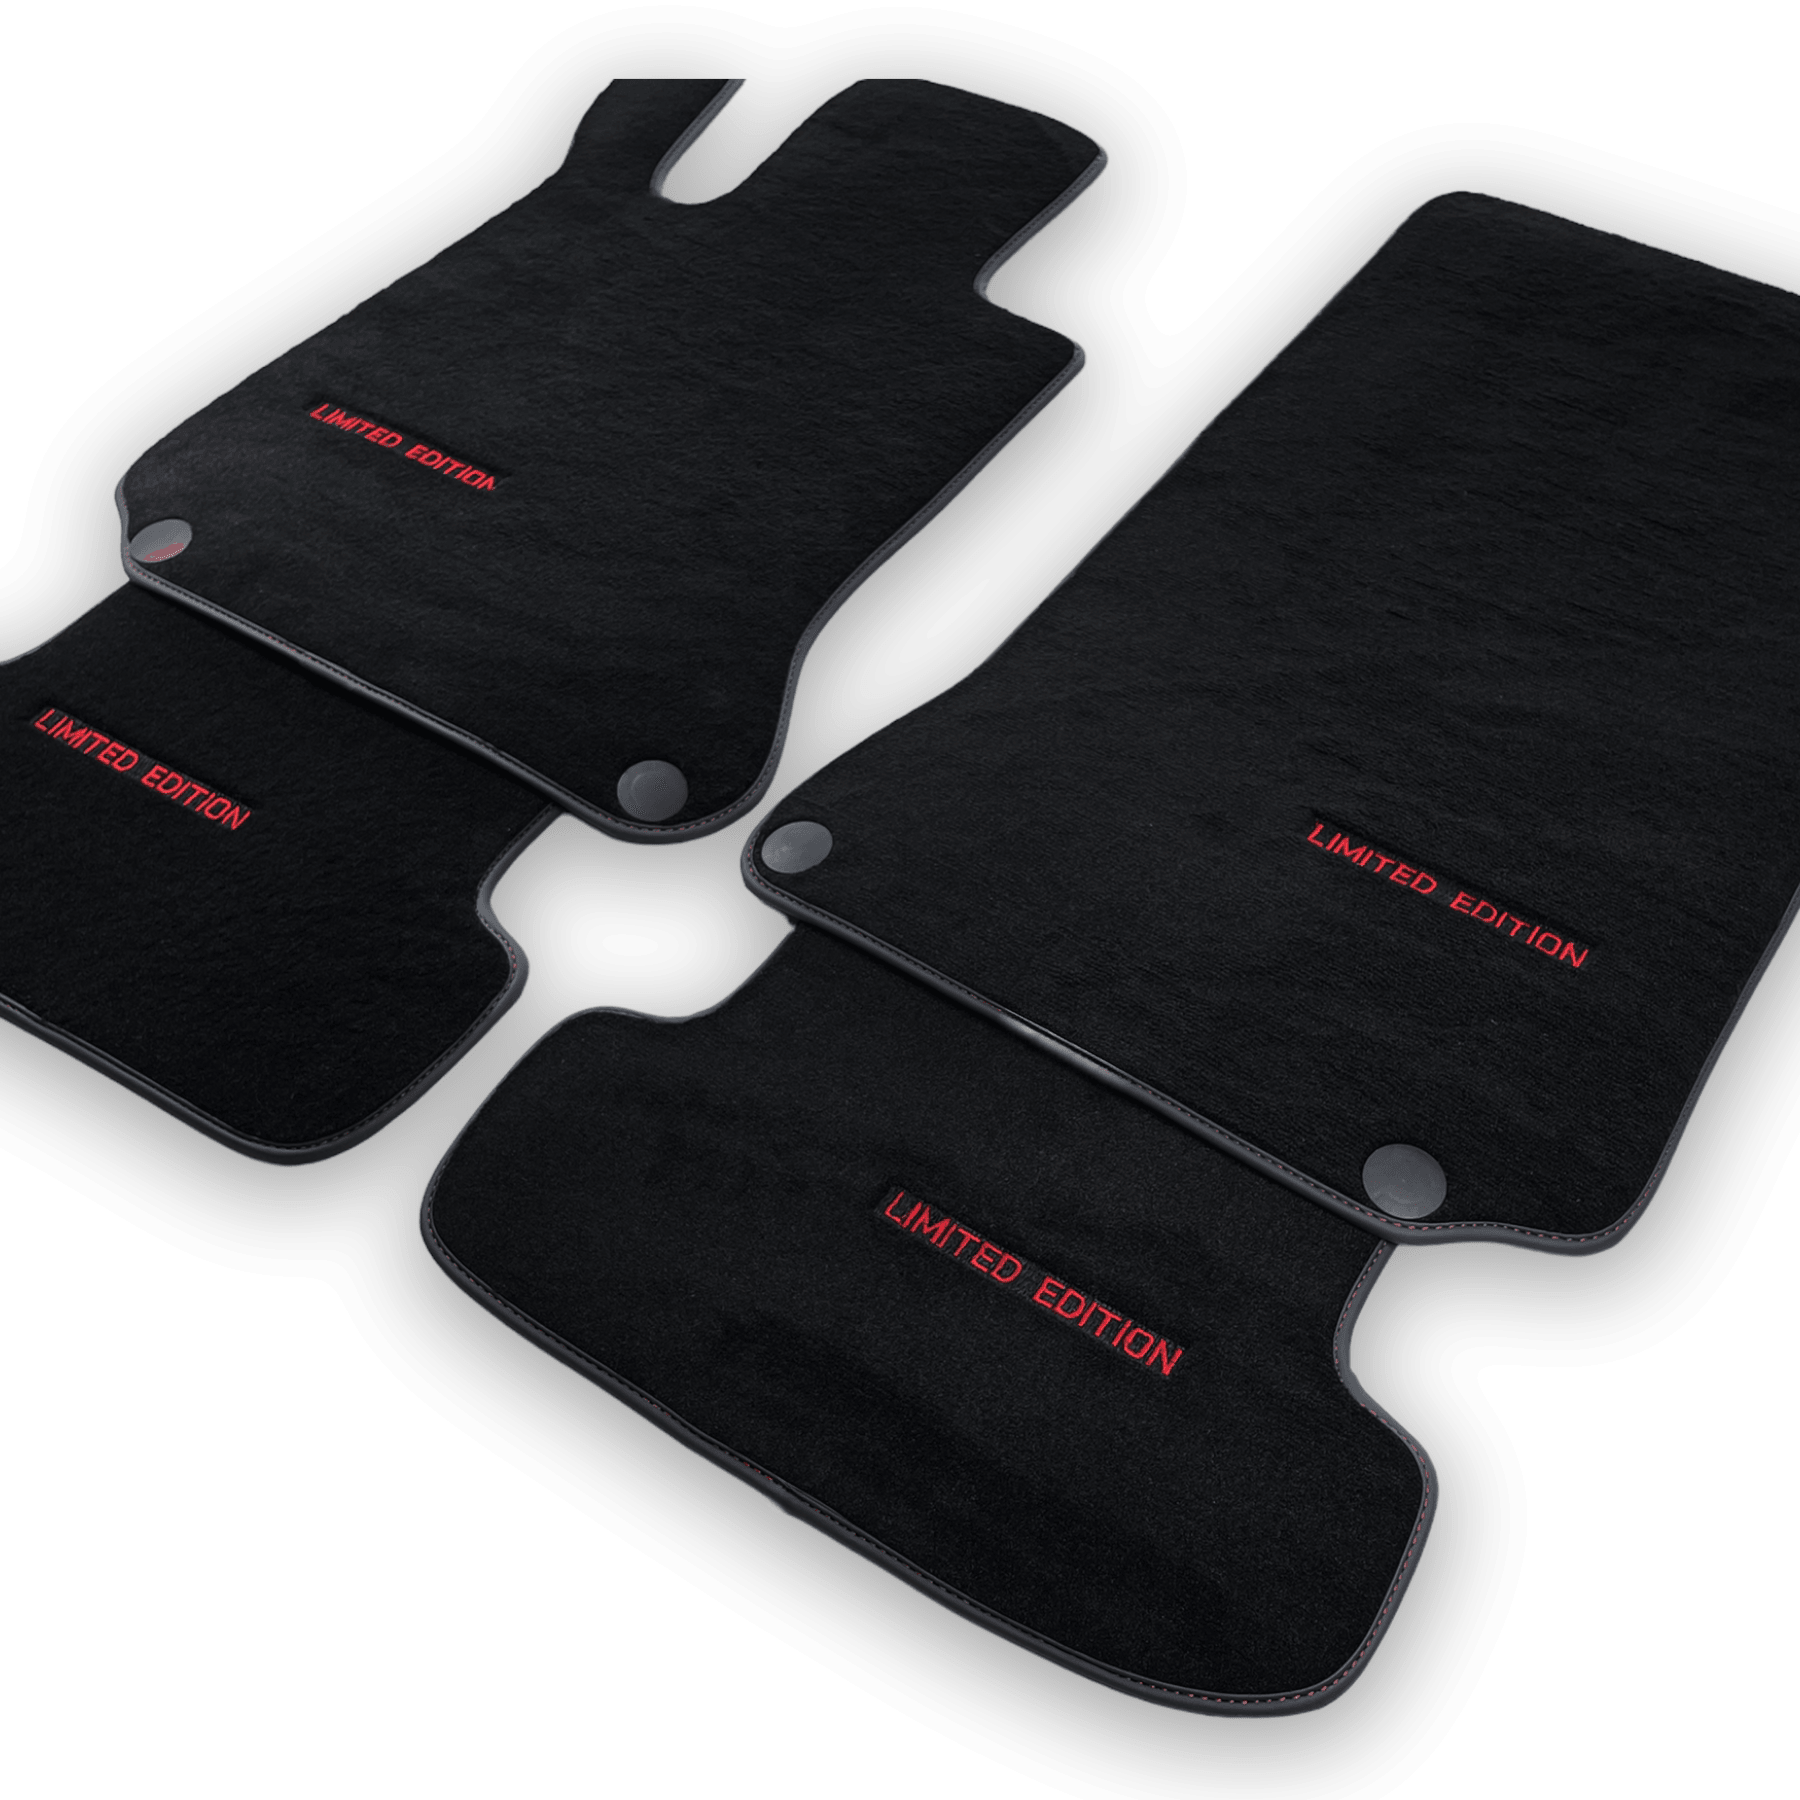 Black Floor Mats For Mercedes Benz A-Class W177 Hybrid (2019-2023) | Limited Edition